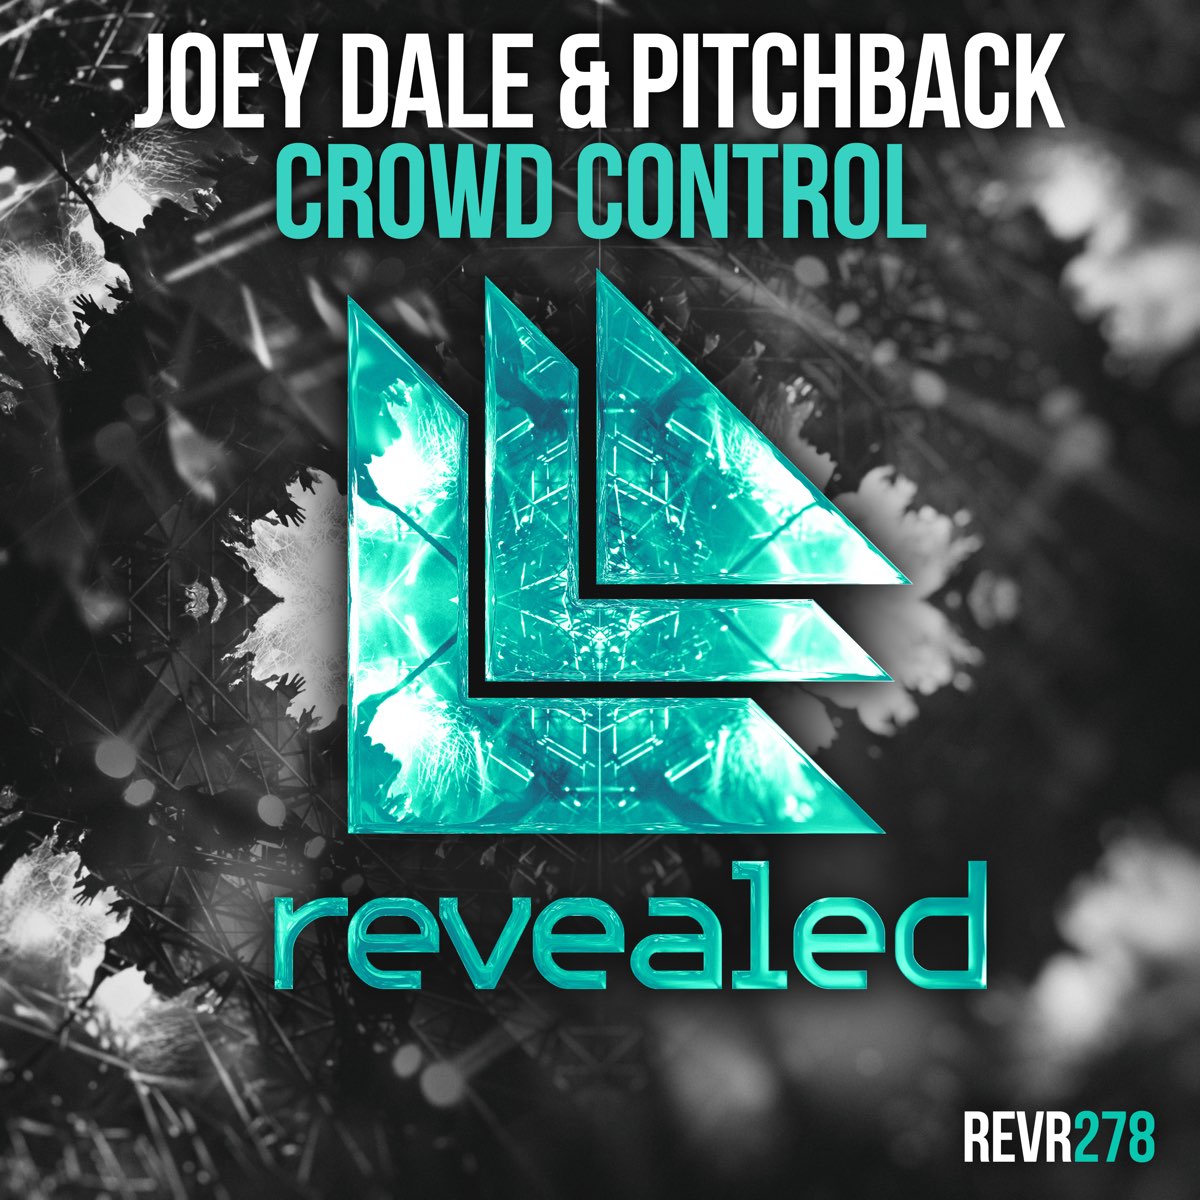 Joey Dale. Crowd Control Band#. Revealed recordings. Crowd control